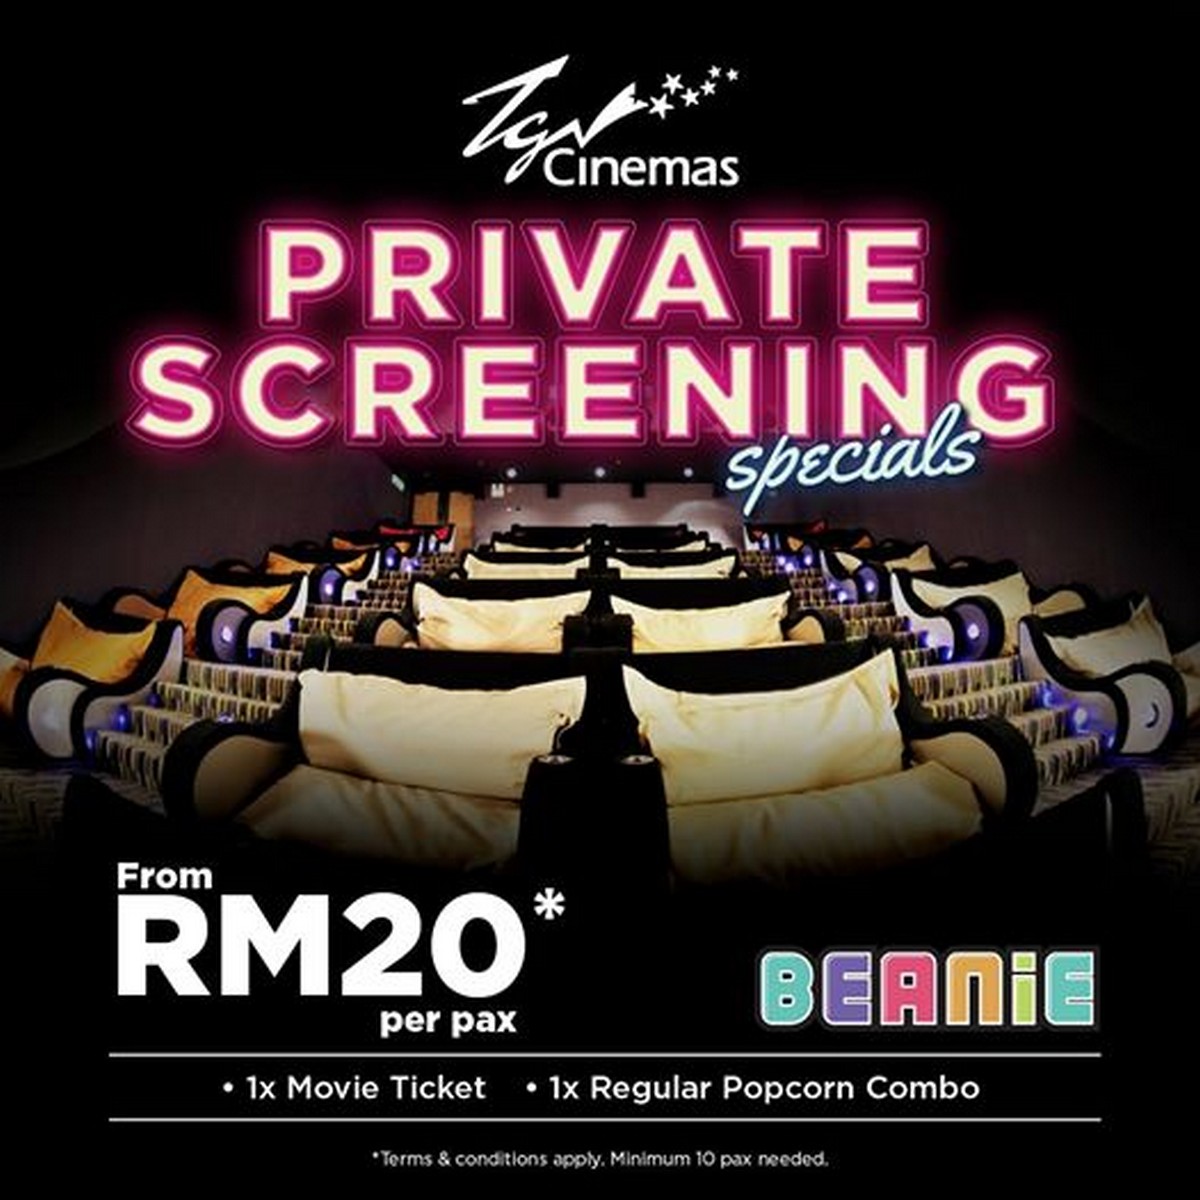 TGV Beanie Hall For Private Screening Specials Where You Can Book The